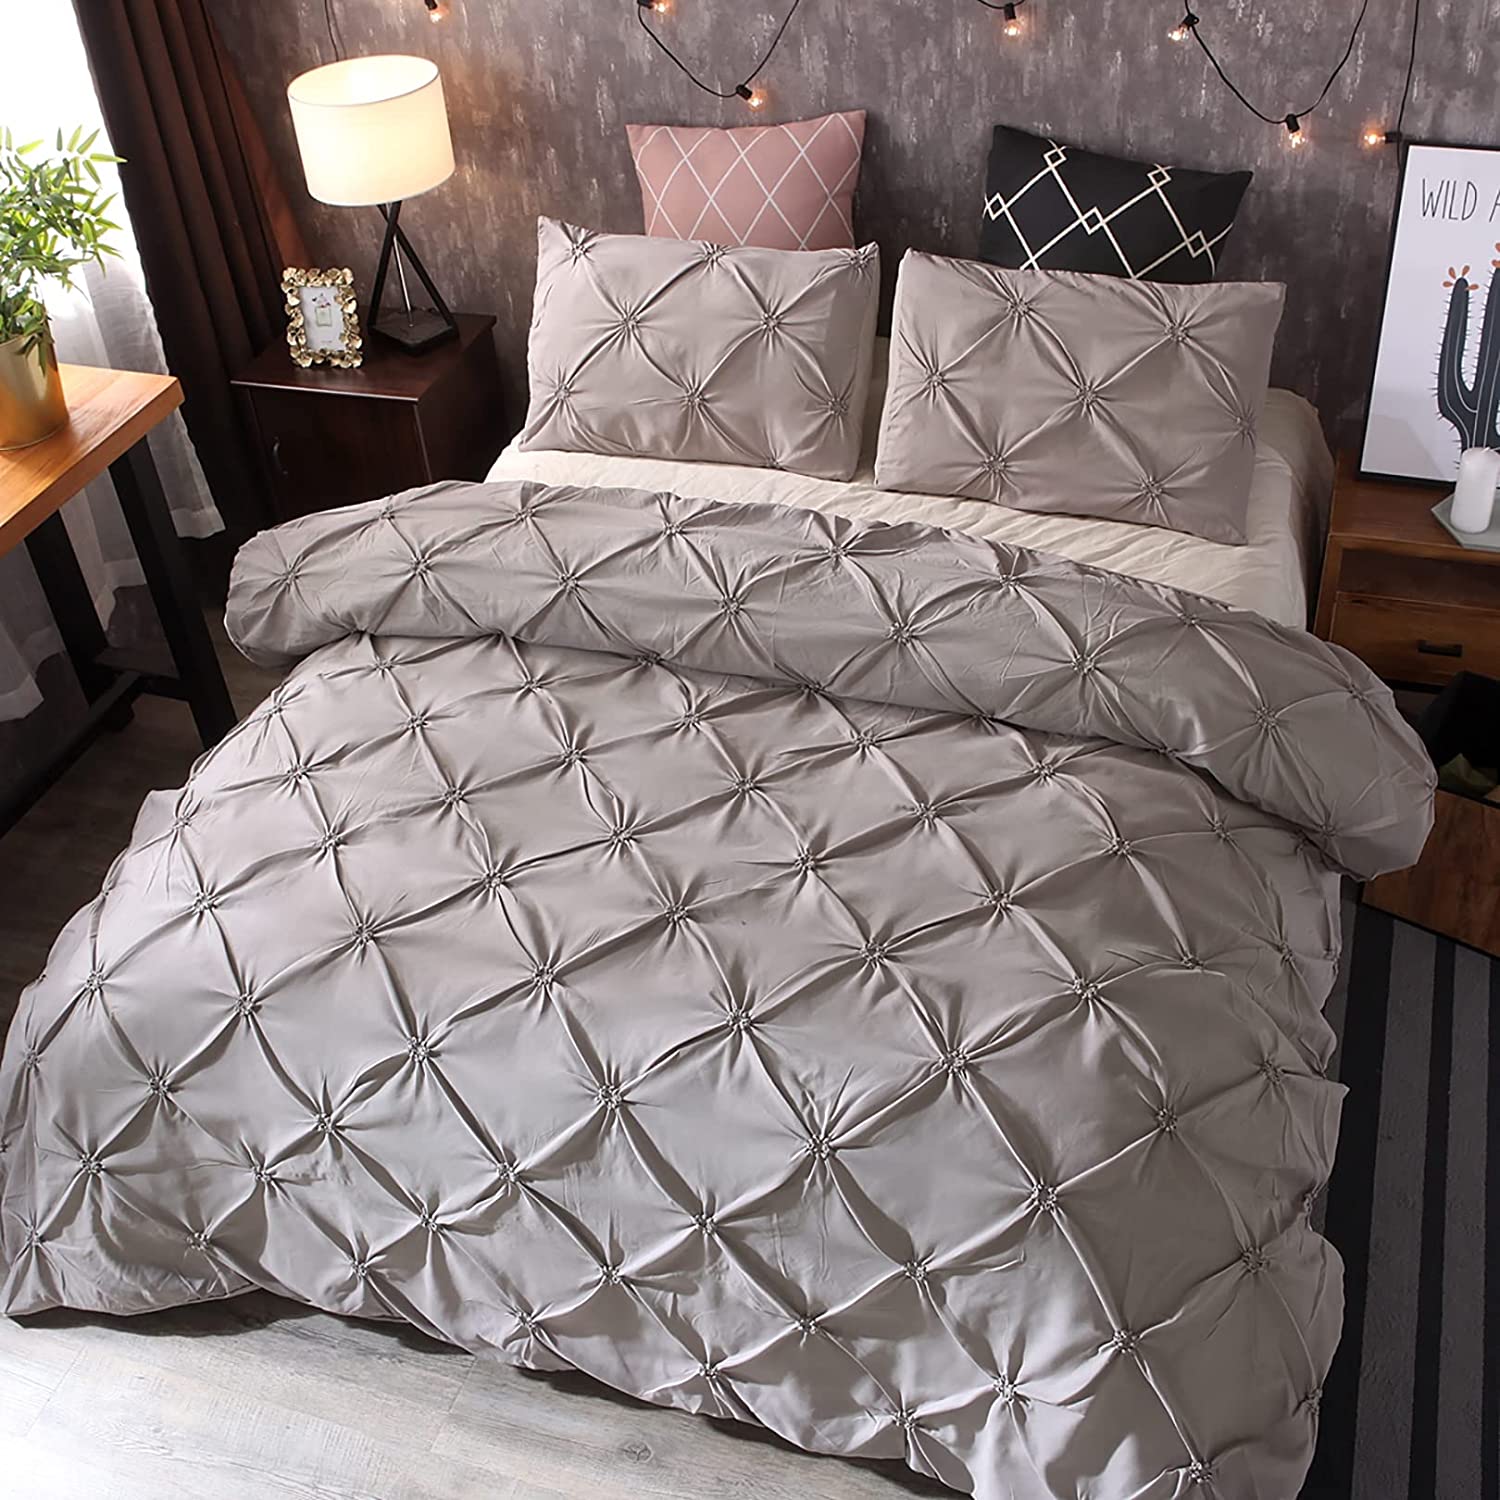 cushion mania 3 Piece Quilted Bedspread Throw Comforter Bedding Sets Shams Checks Double King WINE 